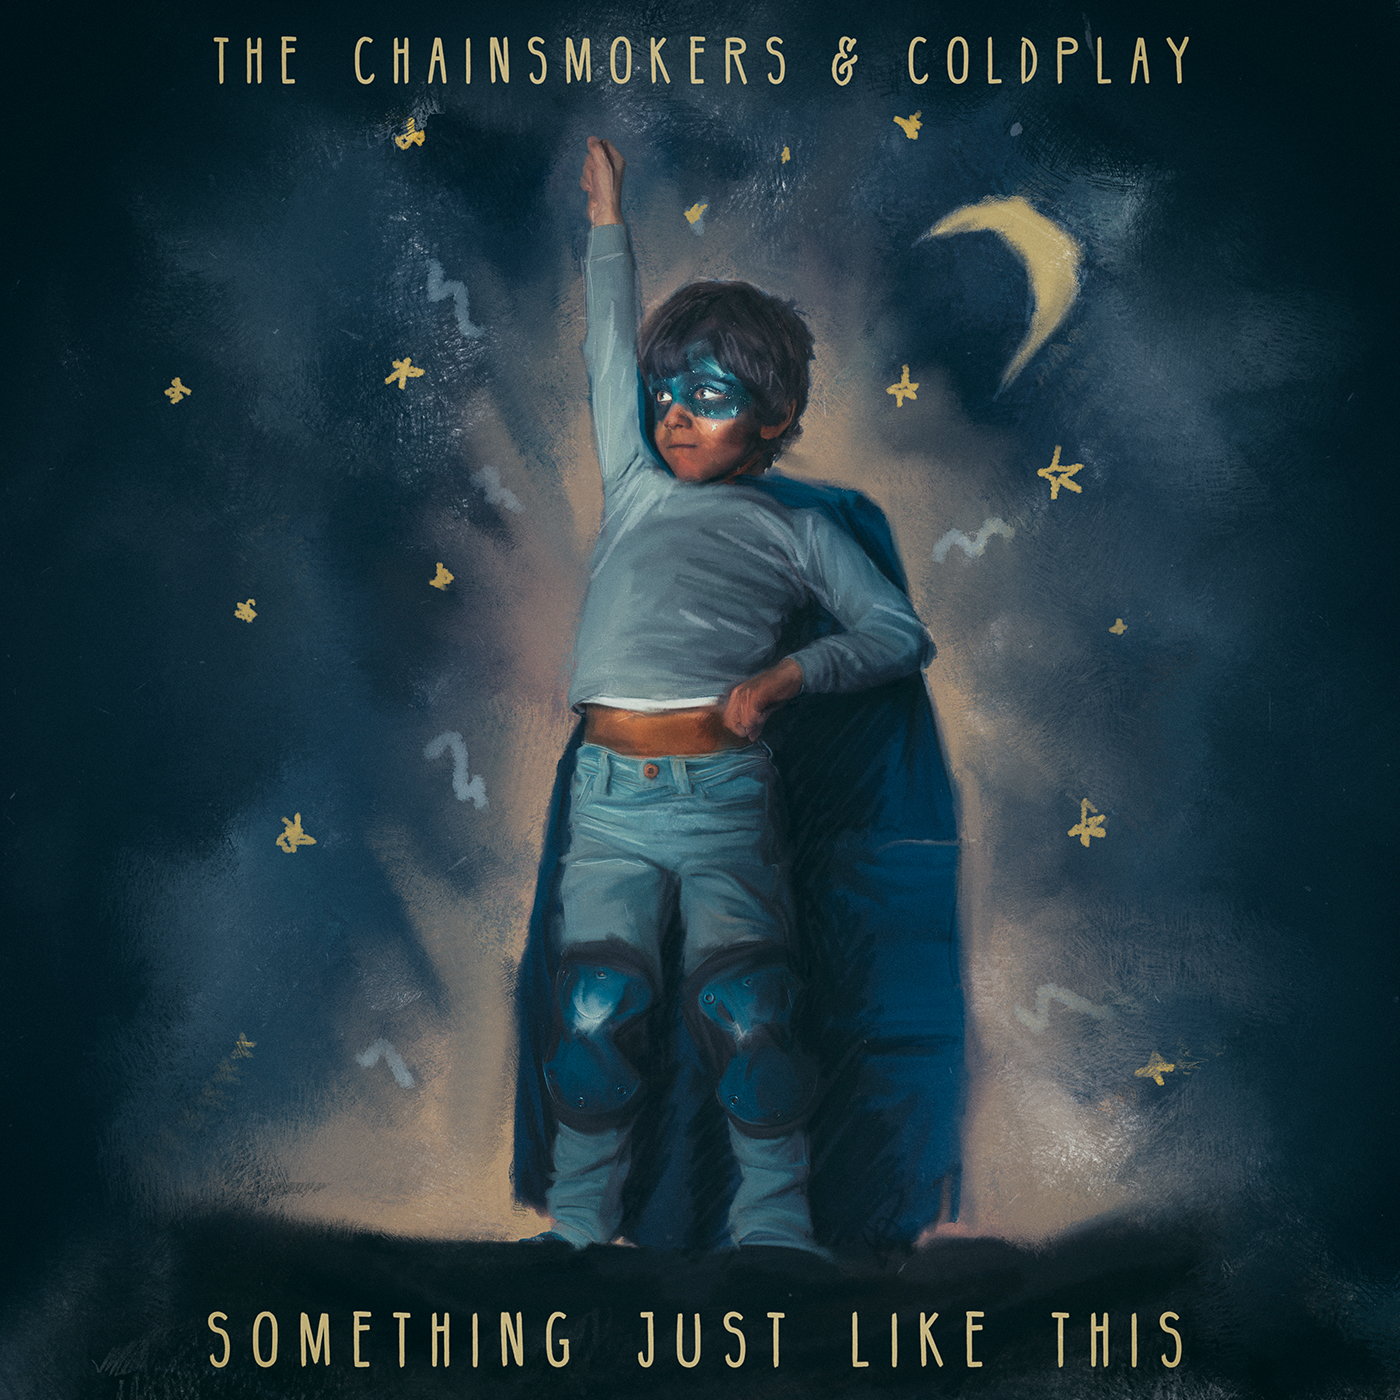 chainsmokers the chainsmokers Coldplay sjlt jzwadlo james zwadlo something just like This artwork Impossible brief